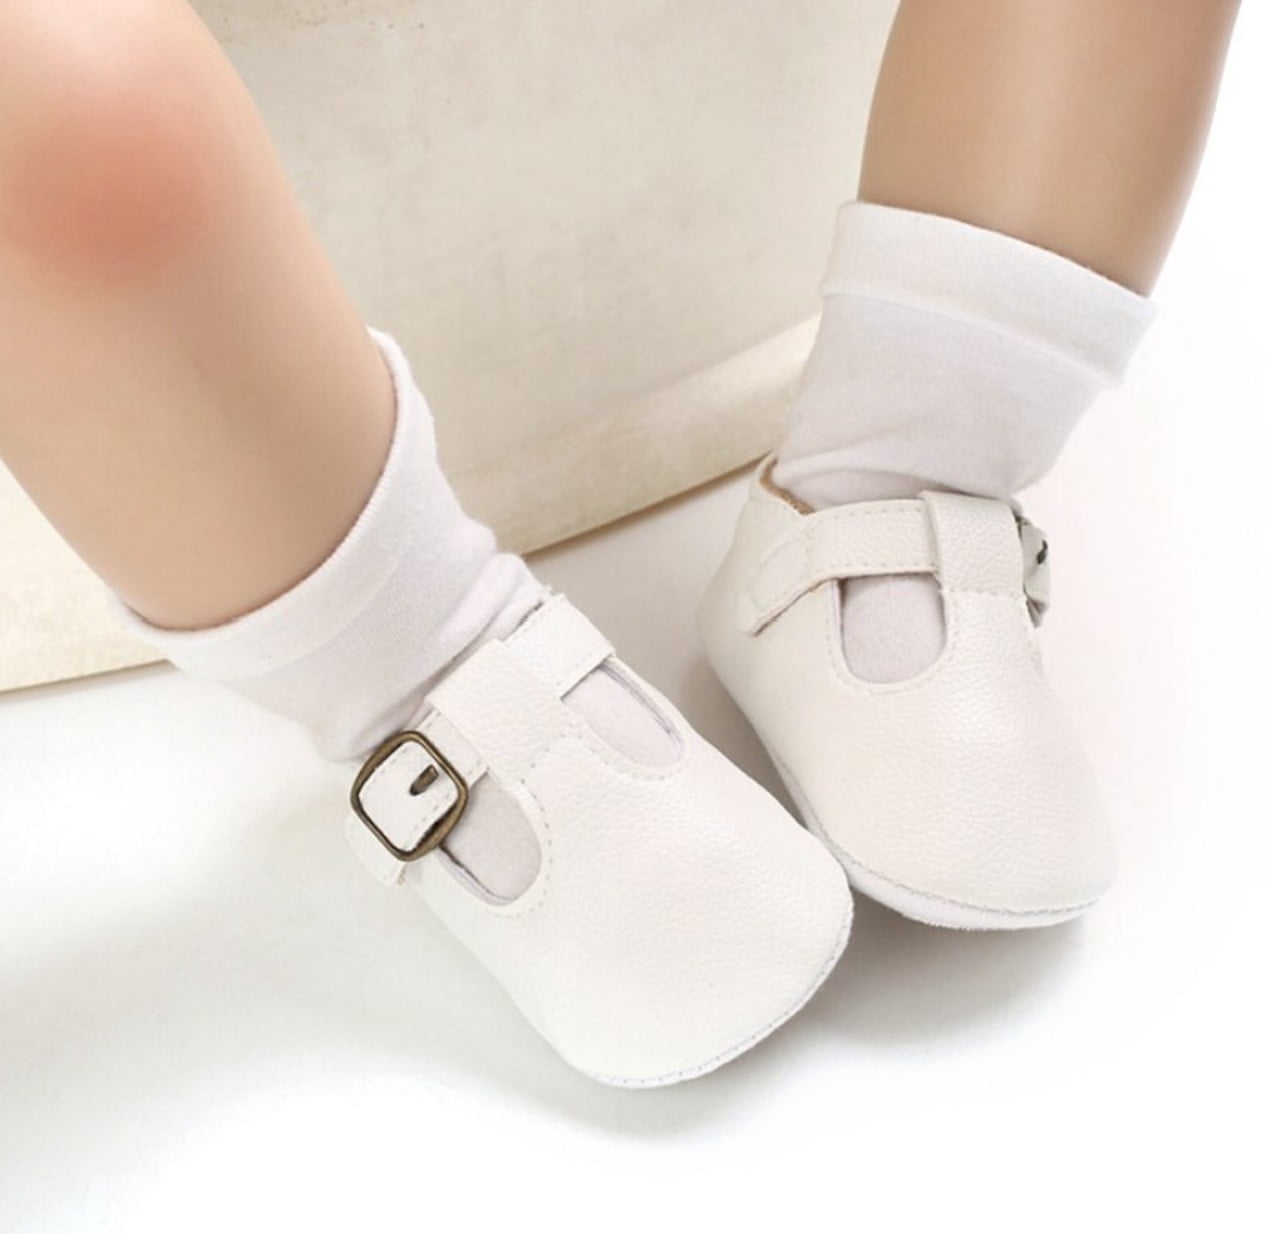 Laurenza's Baby Girls White SoftSole Mary Jane Shoes TStrap 1218m Size 4